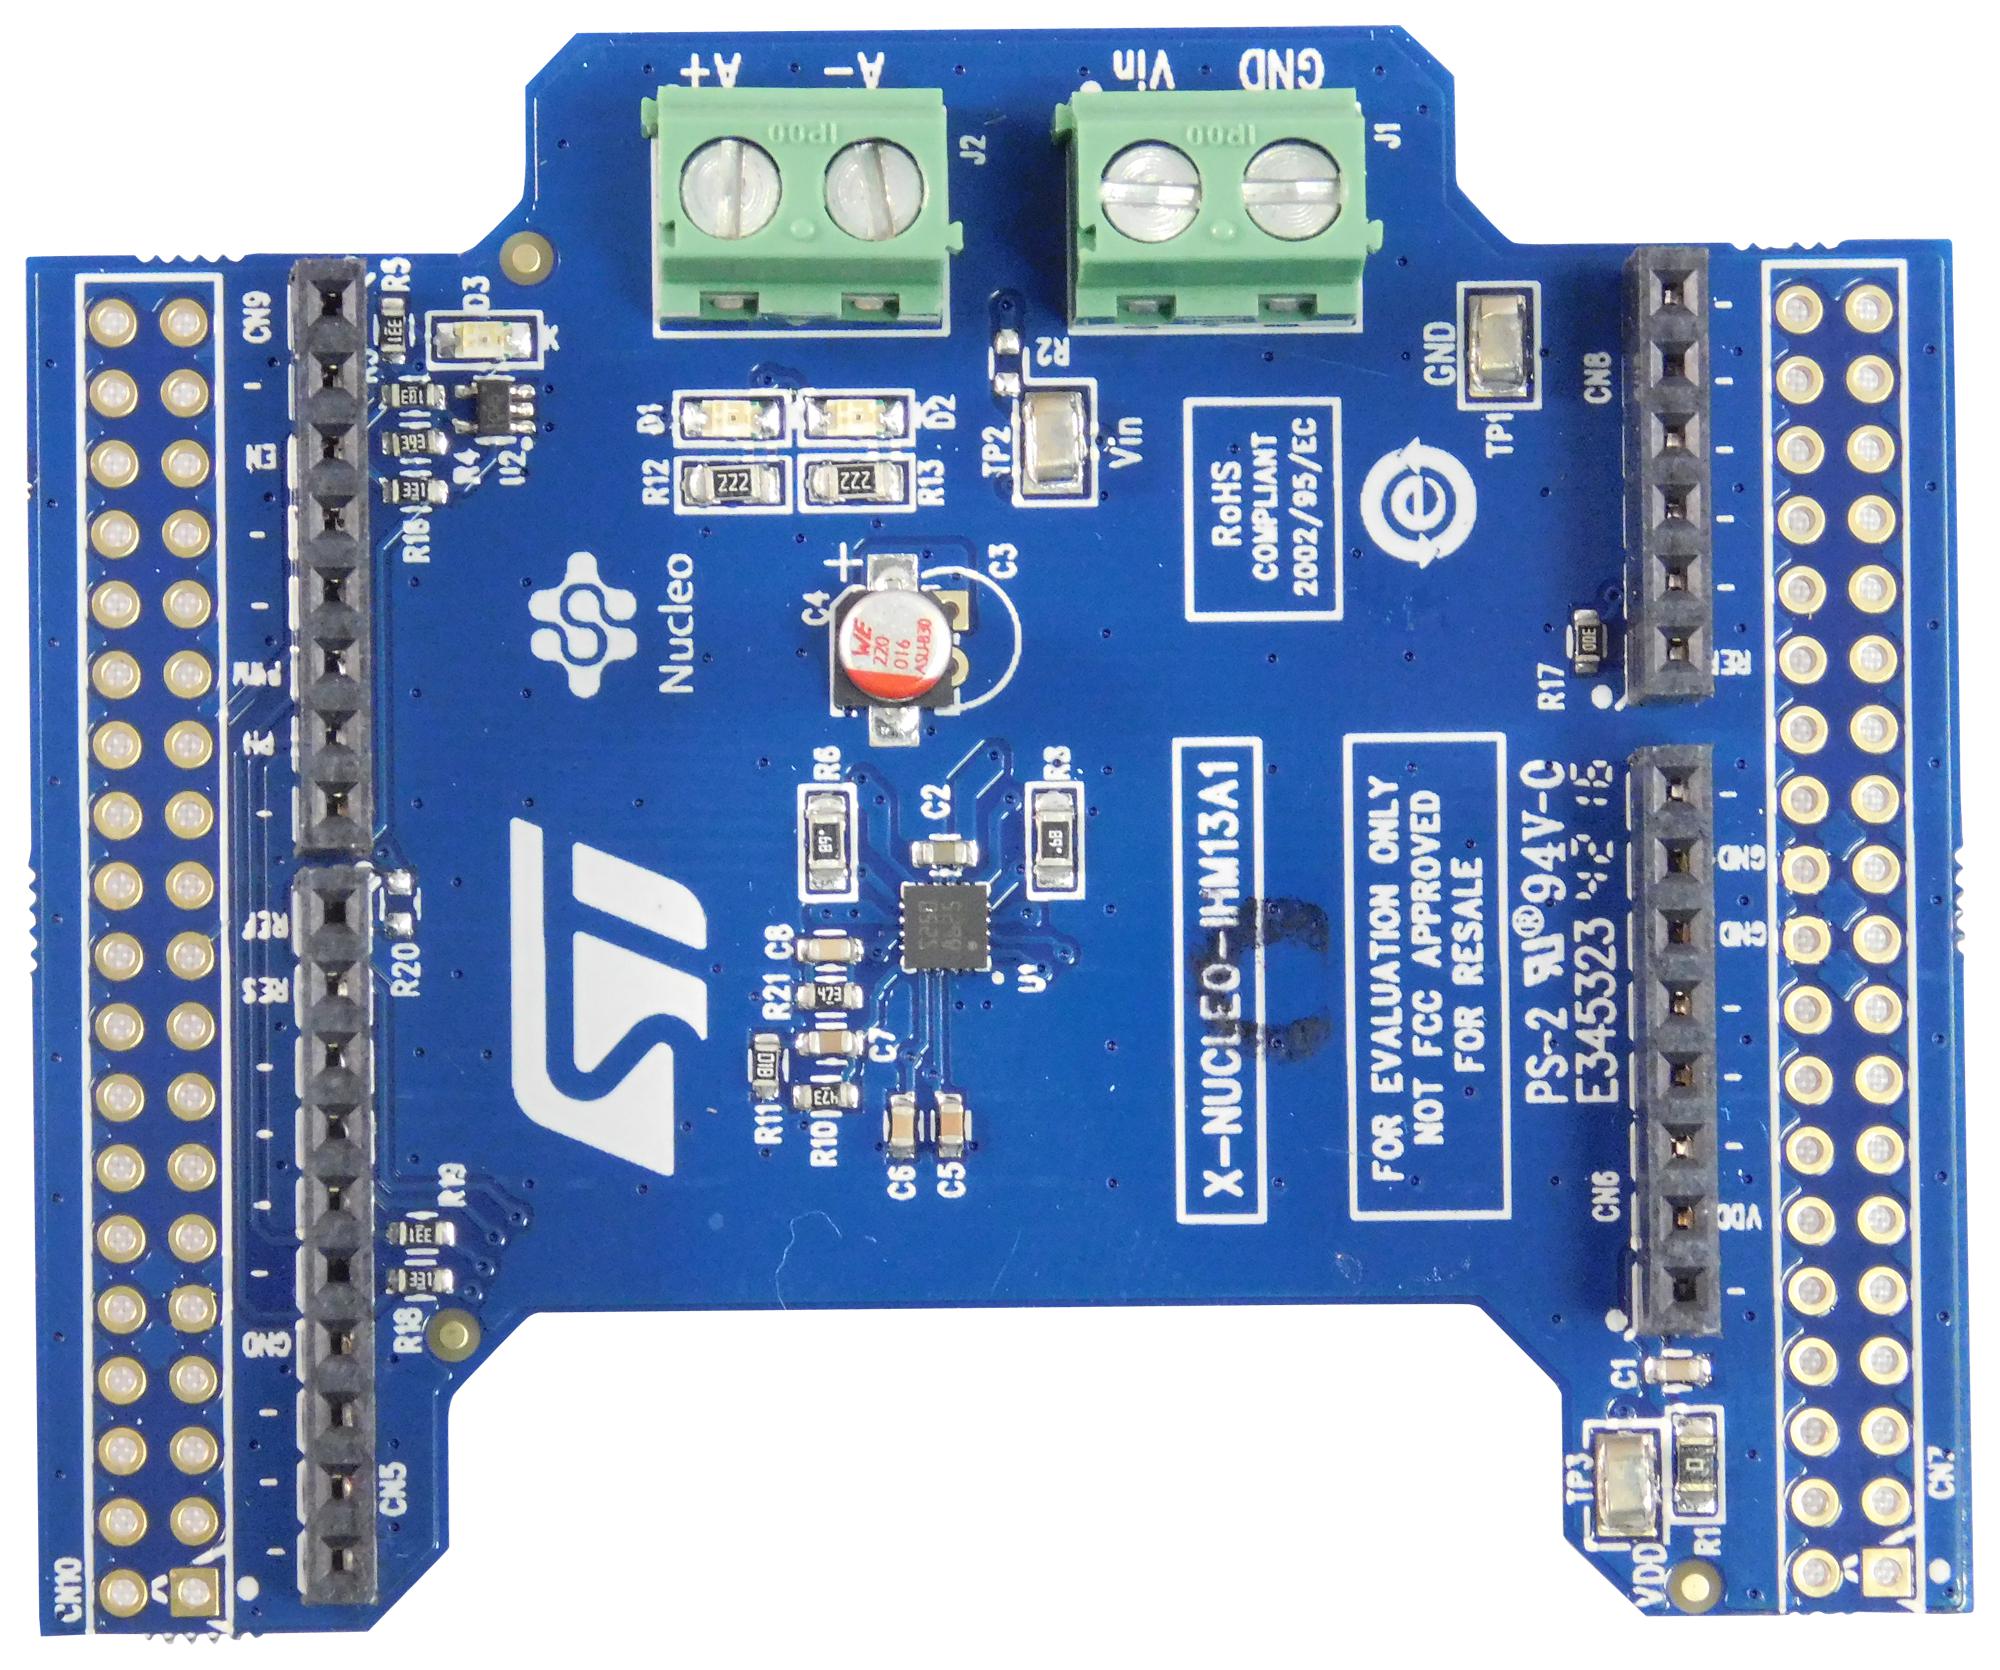 X-NUCLEO-IHM13A1 EXPANSION BOARD, BRUSHED DC MOTOR DRIVER STMICROELECTRONICS